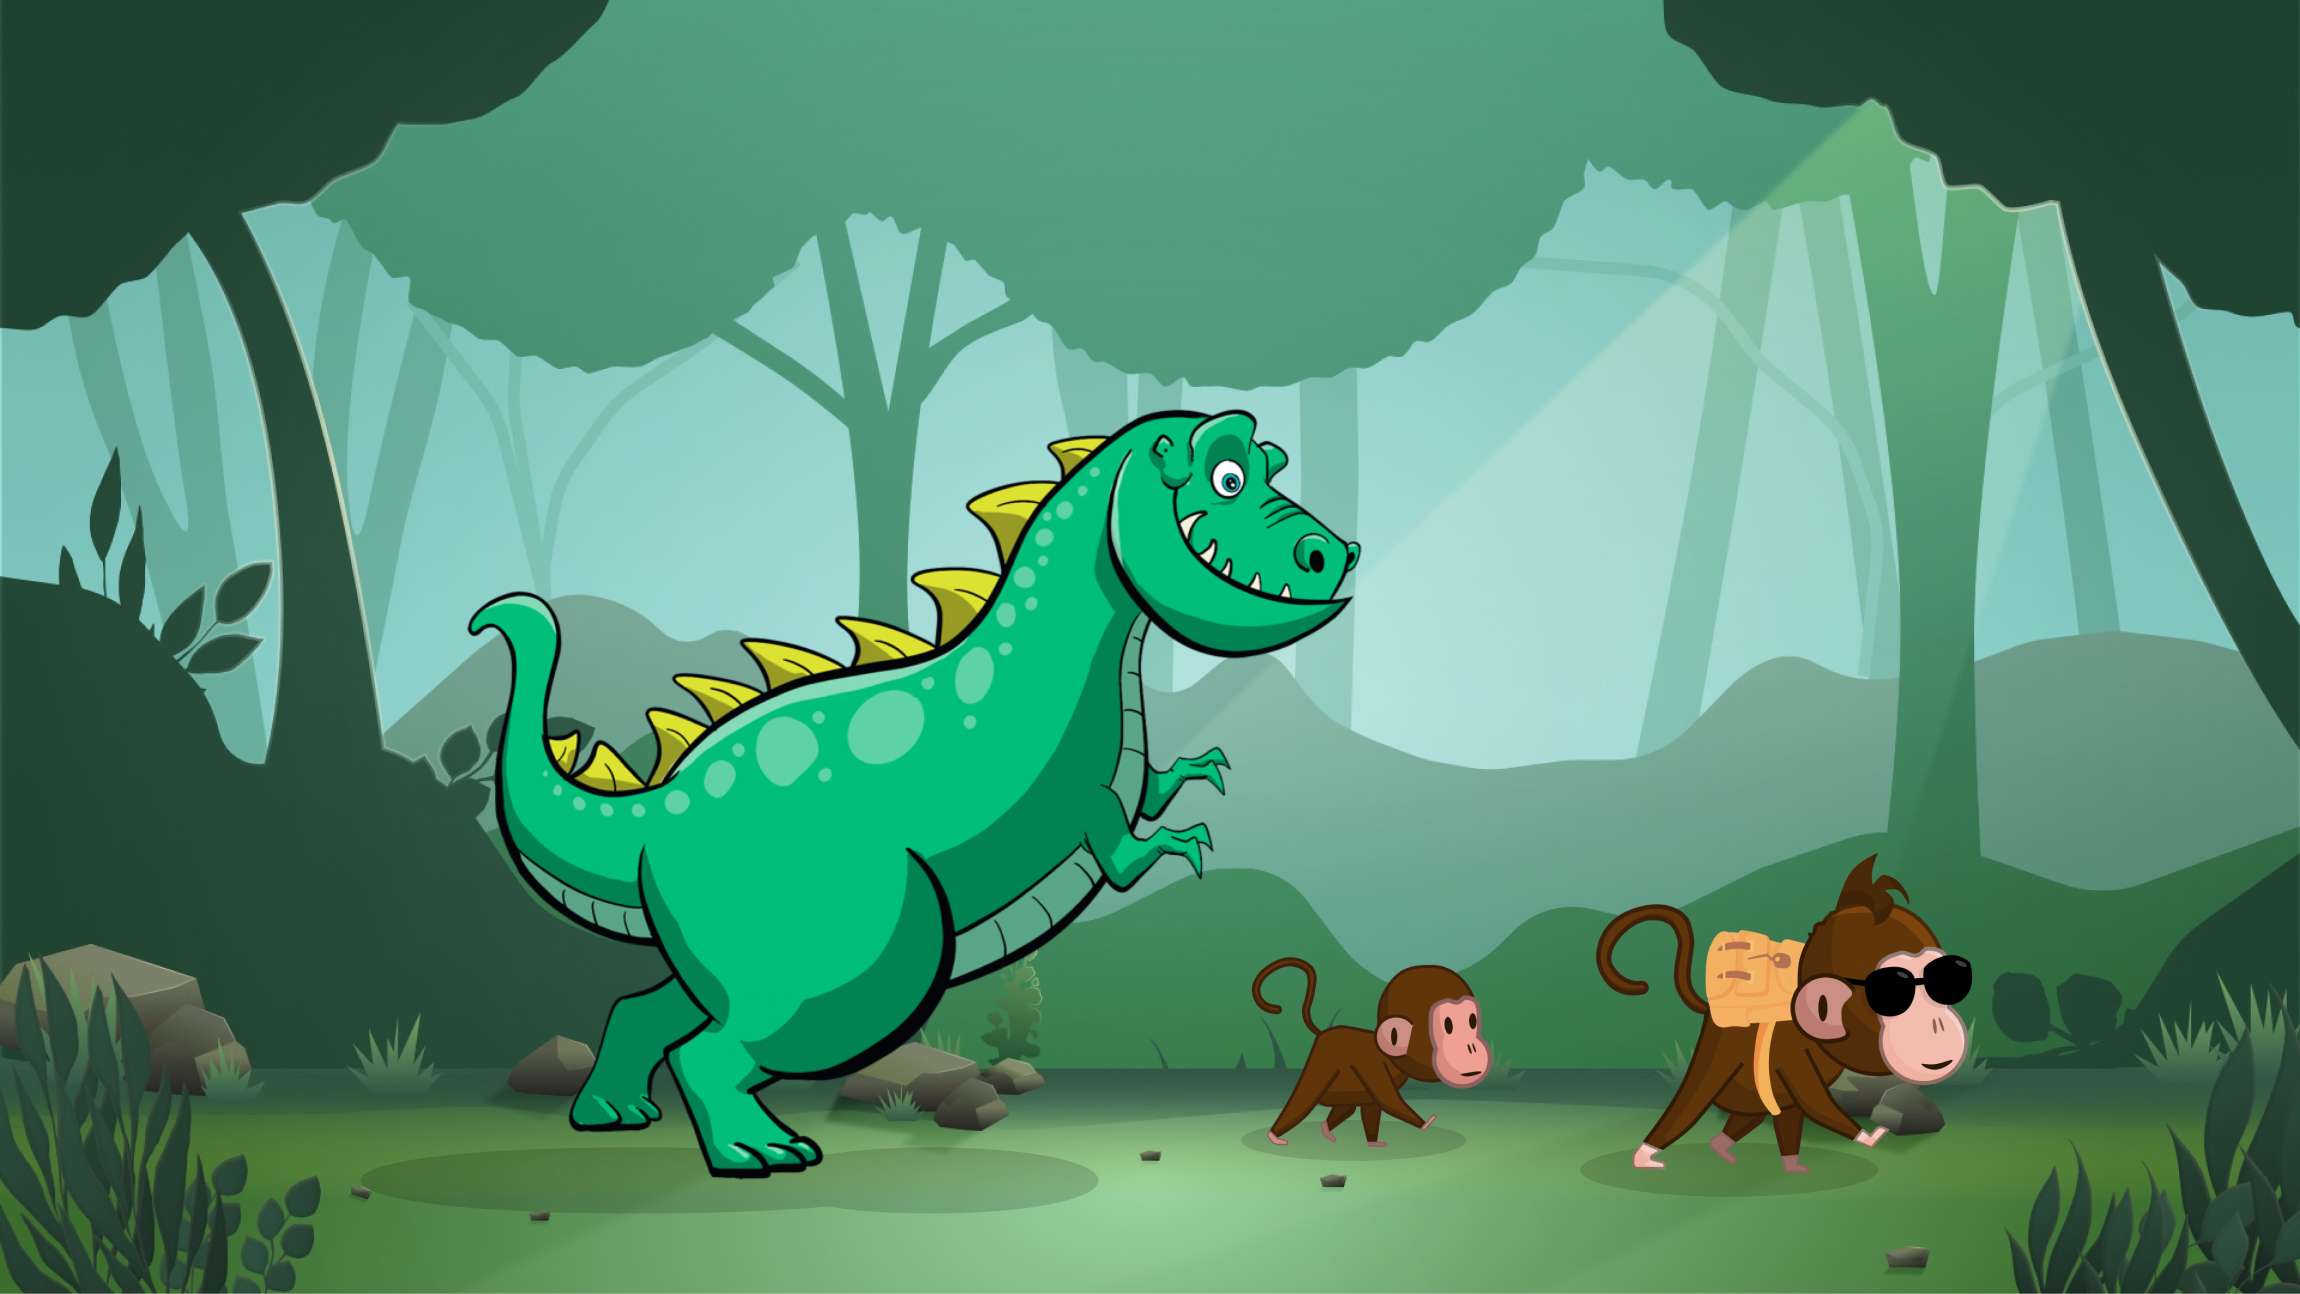 An example of the Self-learn project showing a T-rex